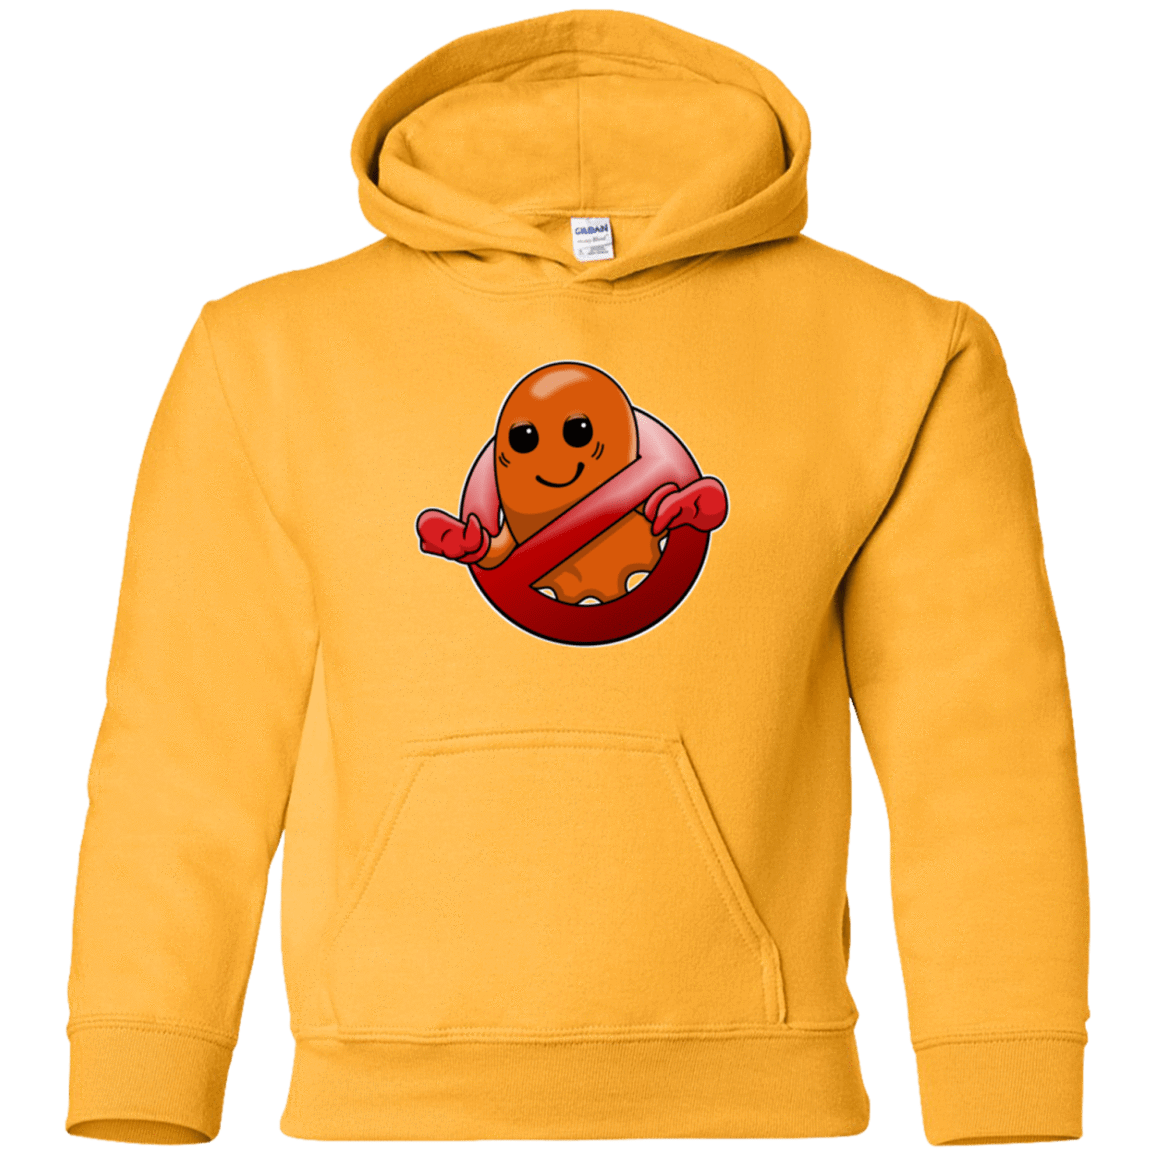 Sweatshirts Gold / YS Clyde Buster Youth Hoodie